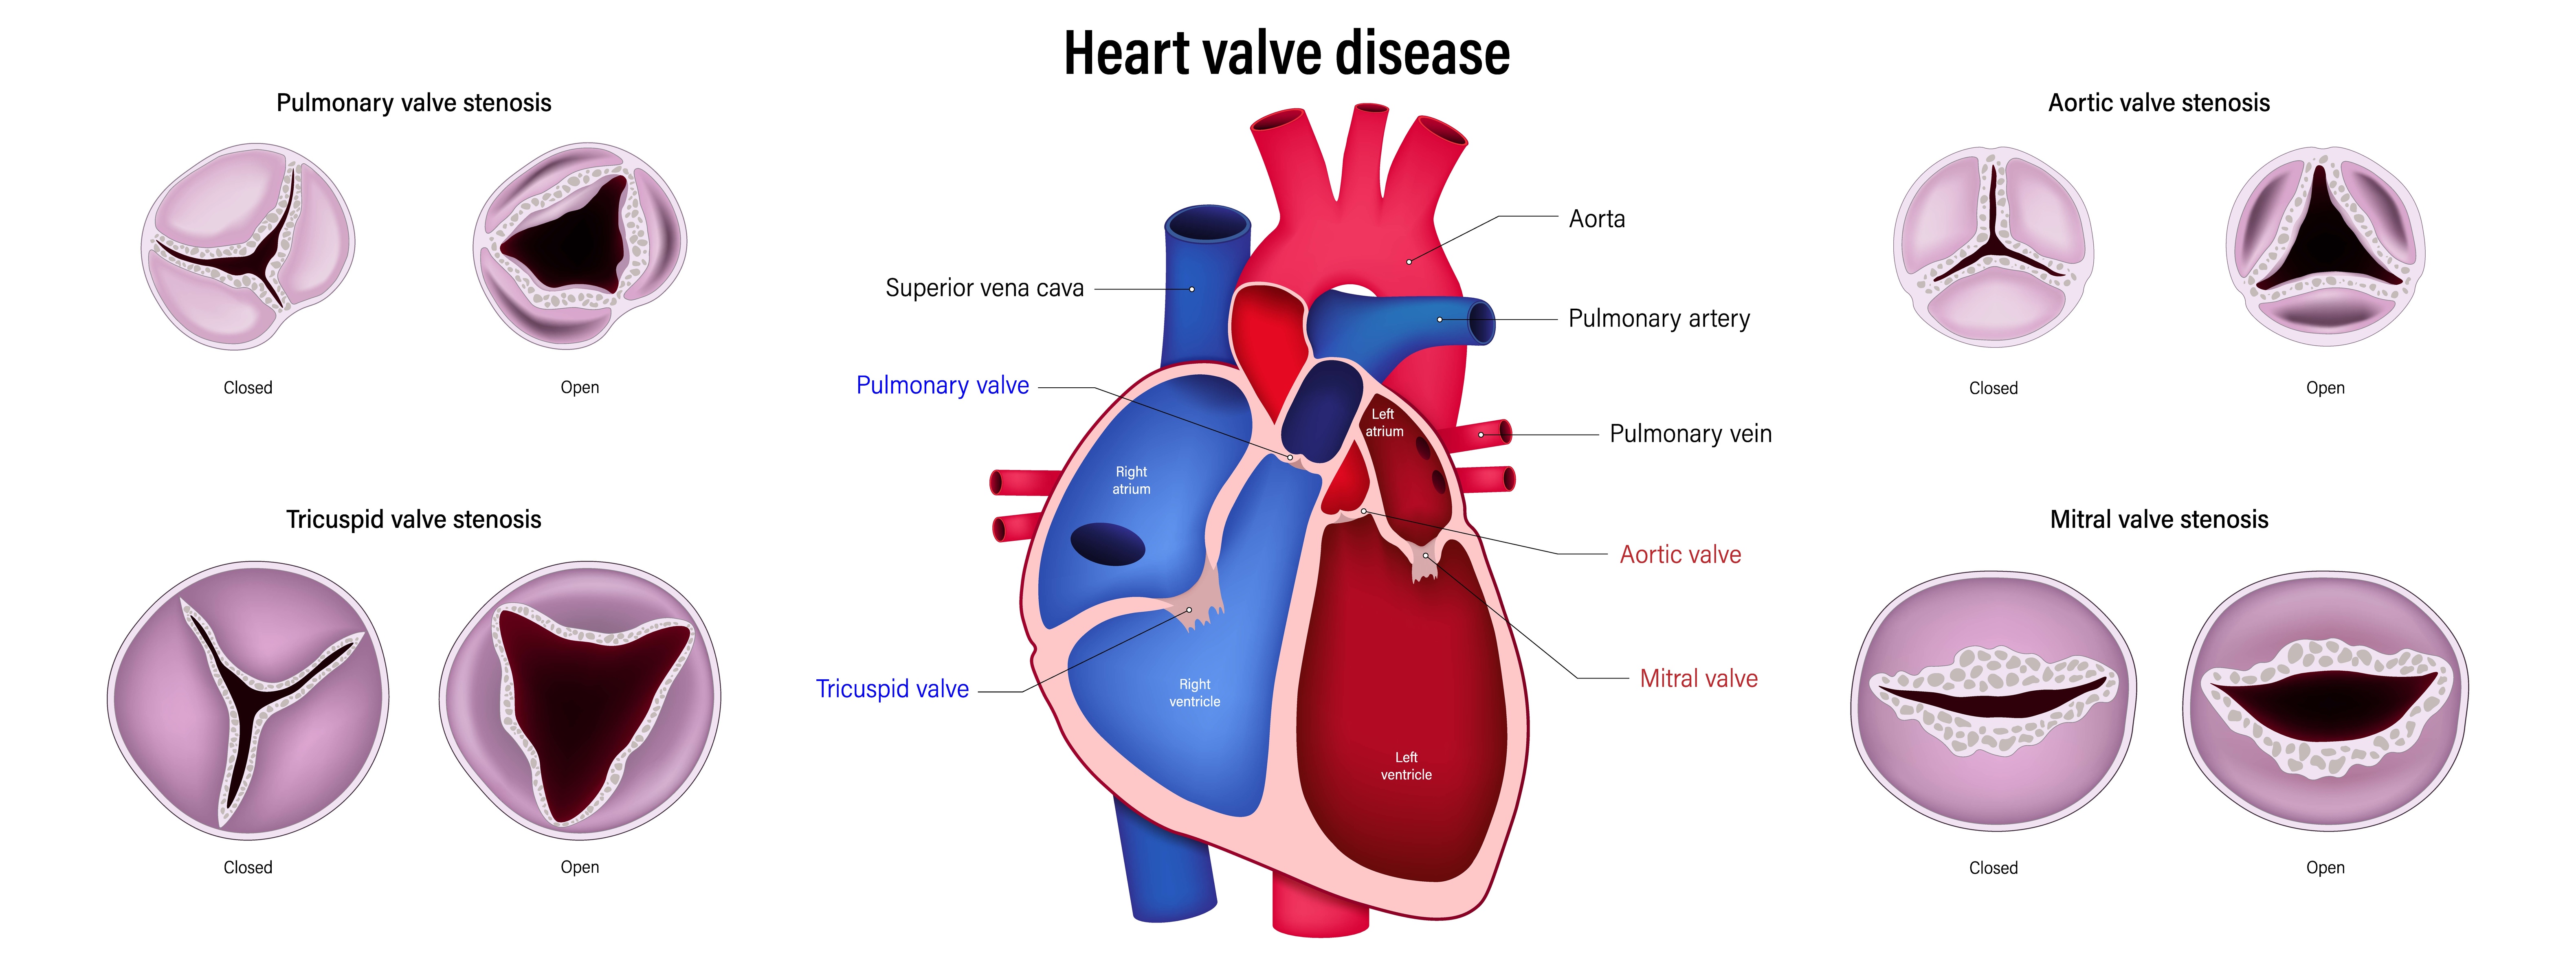 heart valve diseases and treatment